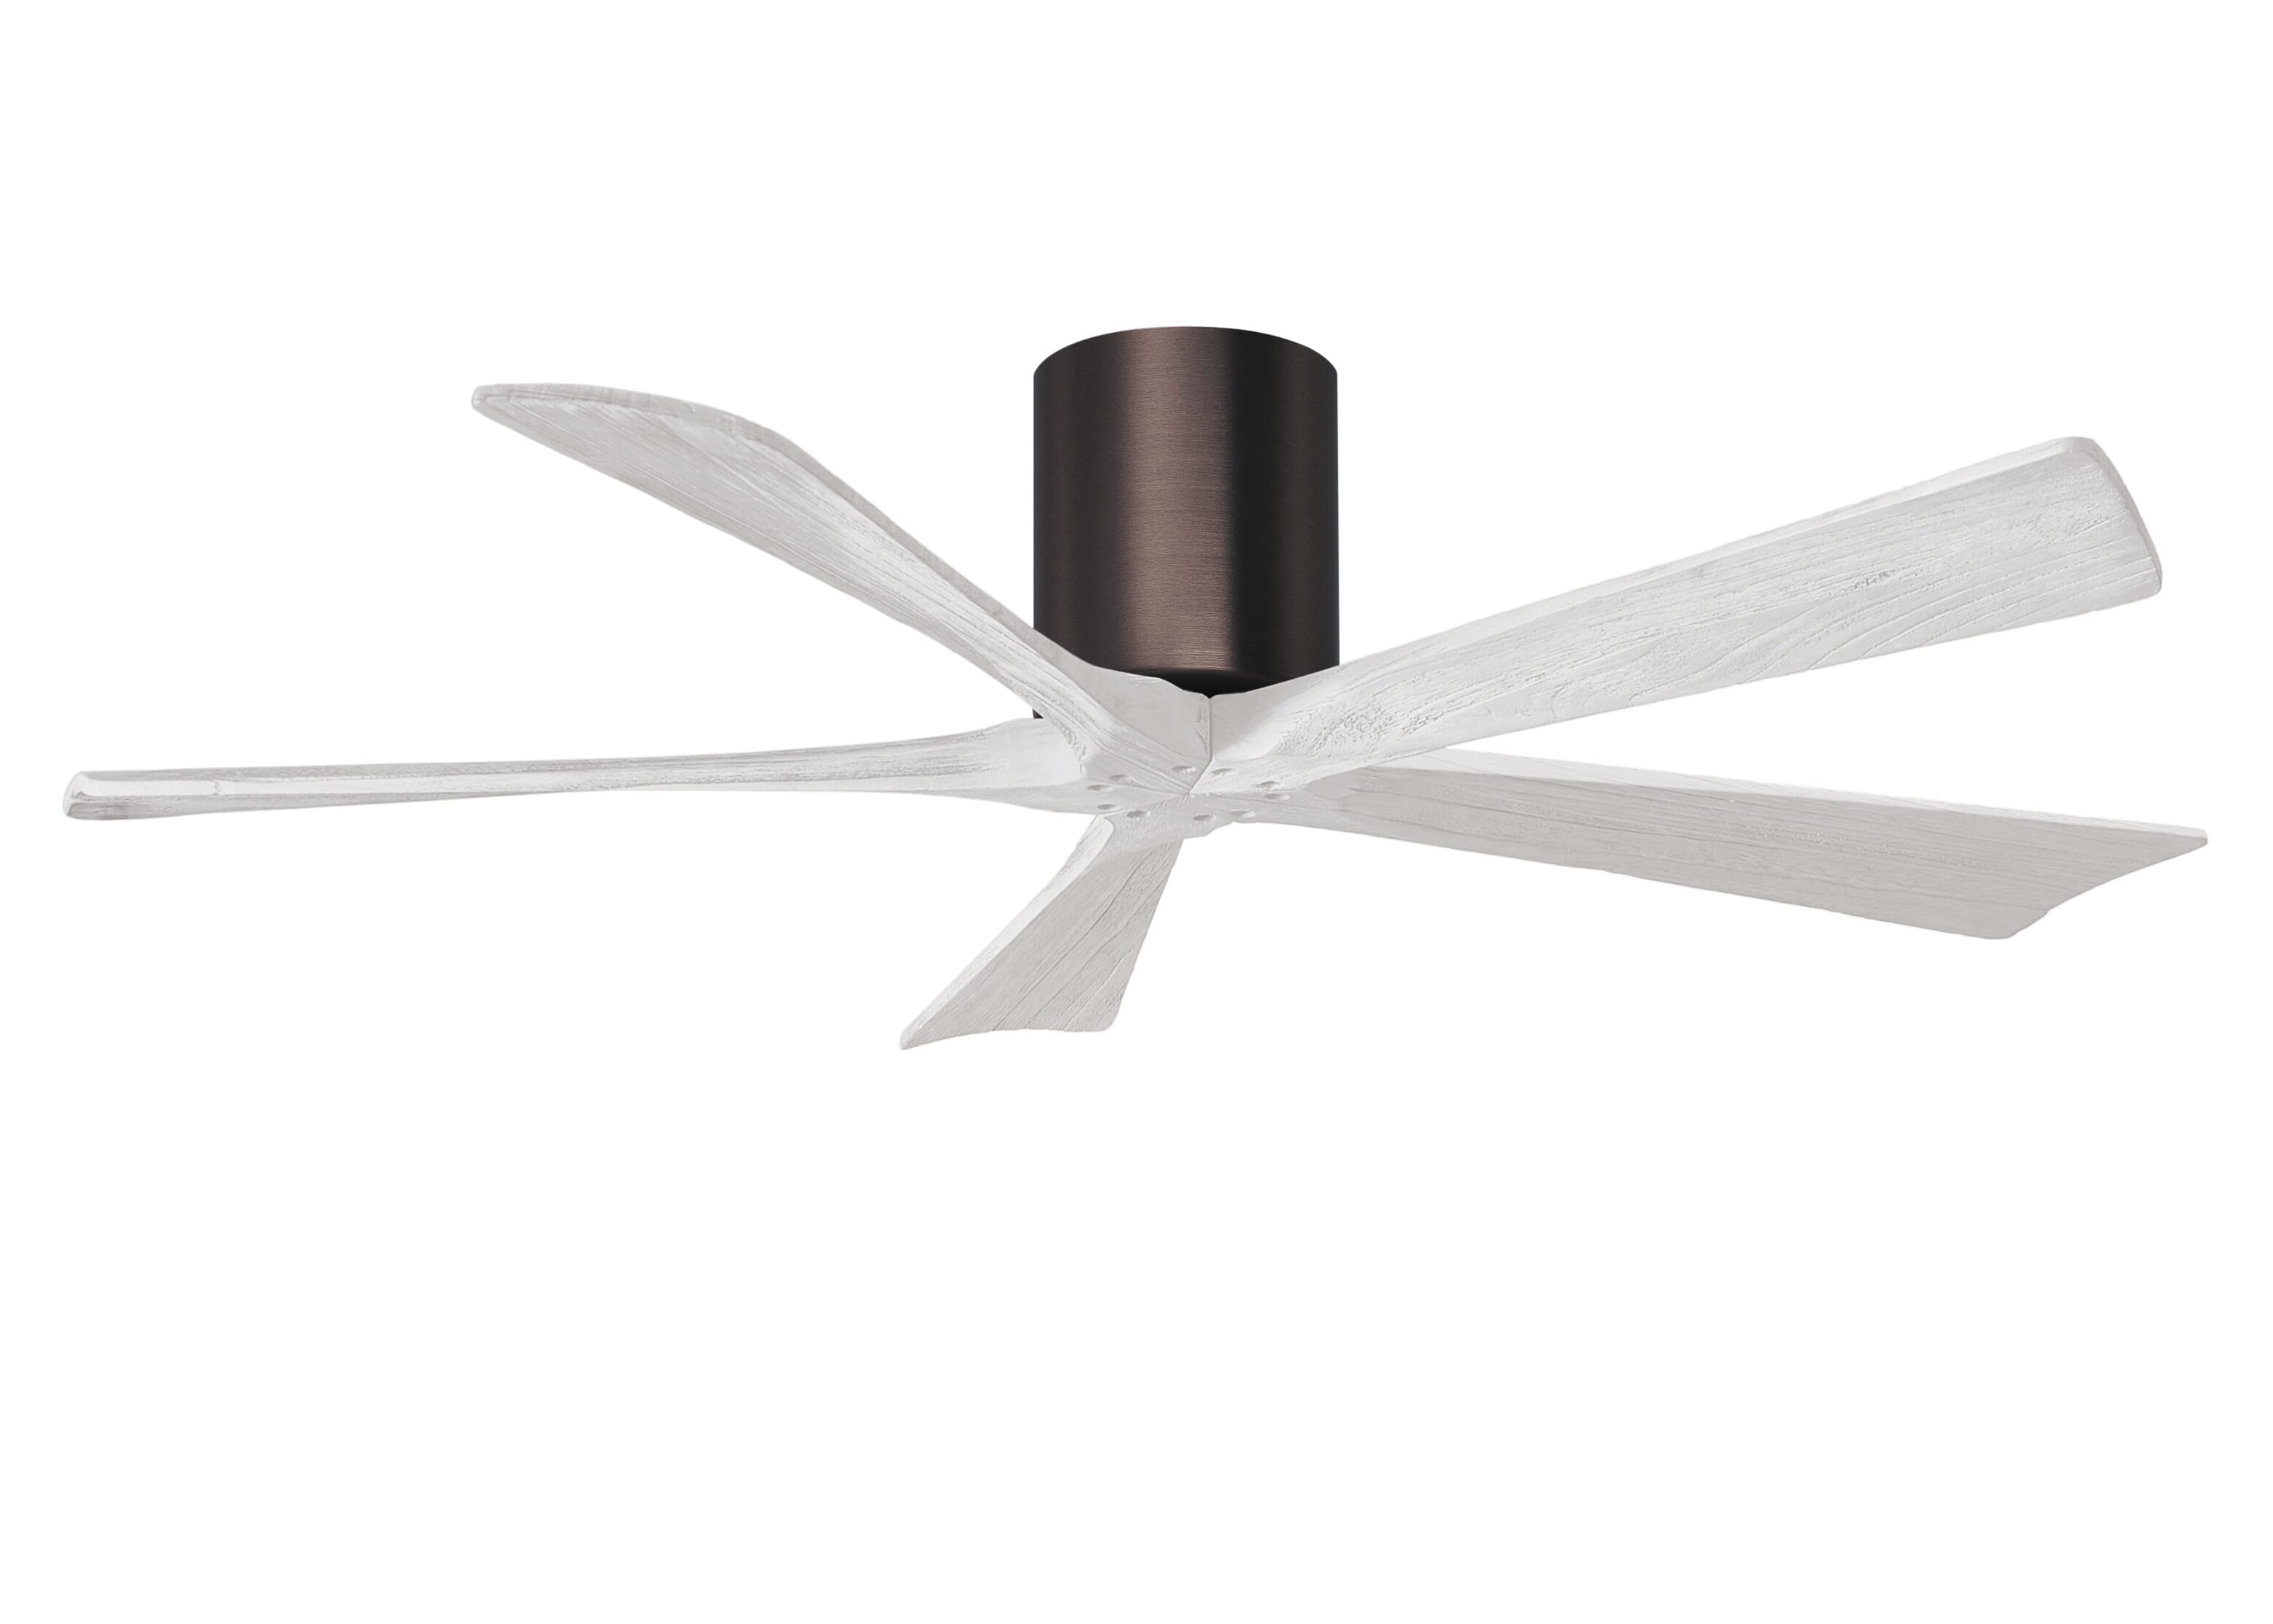 Irene 6-Speed DC 52"" Ceiling Fan in Brushed Bronze with Matte White blades -  Matthews Fan Company, IR5H-BB-MWH-52